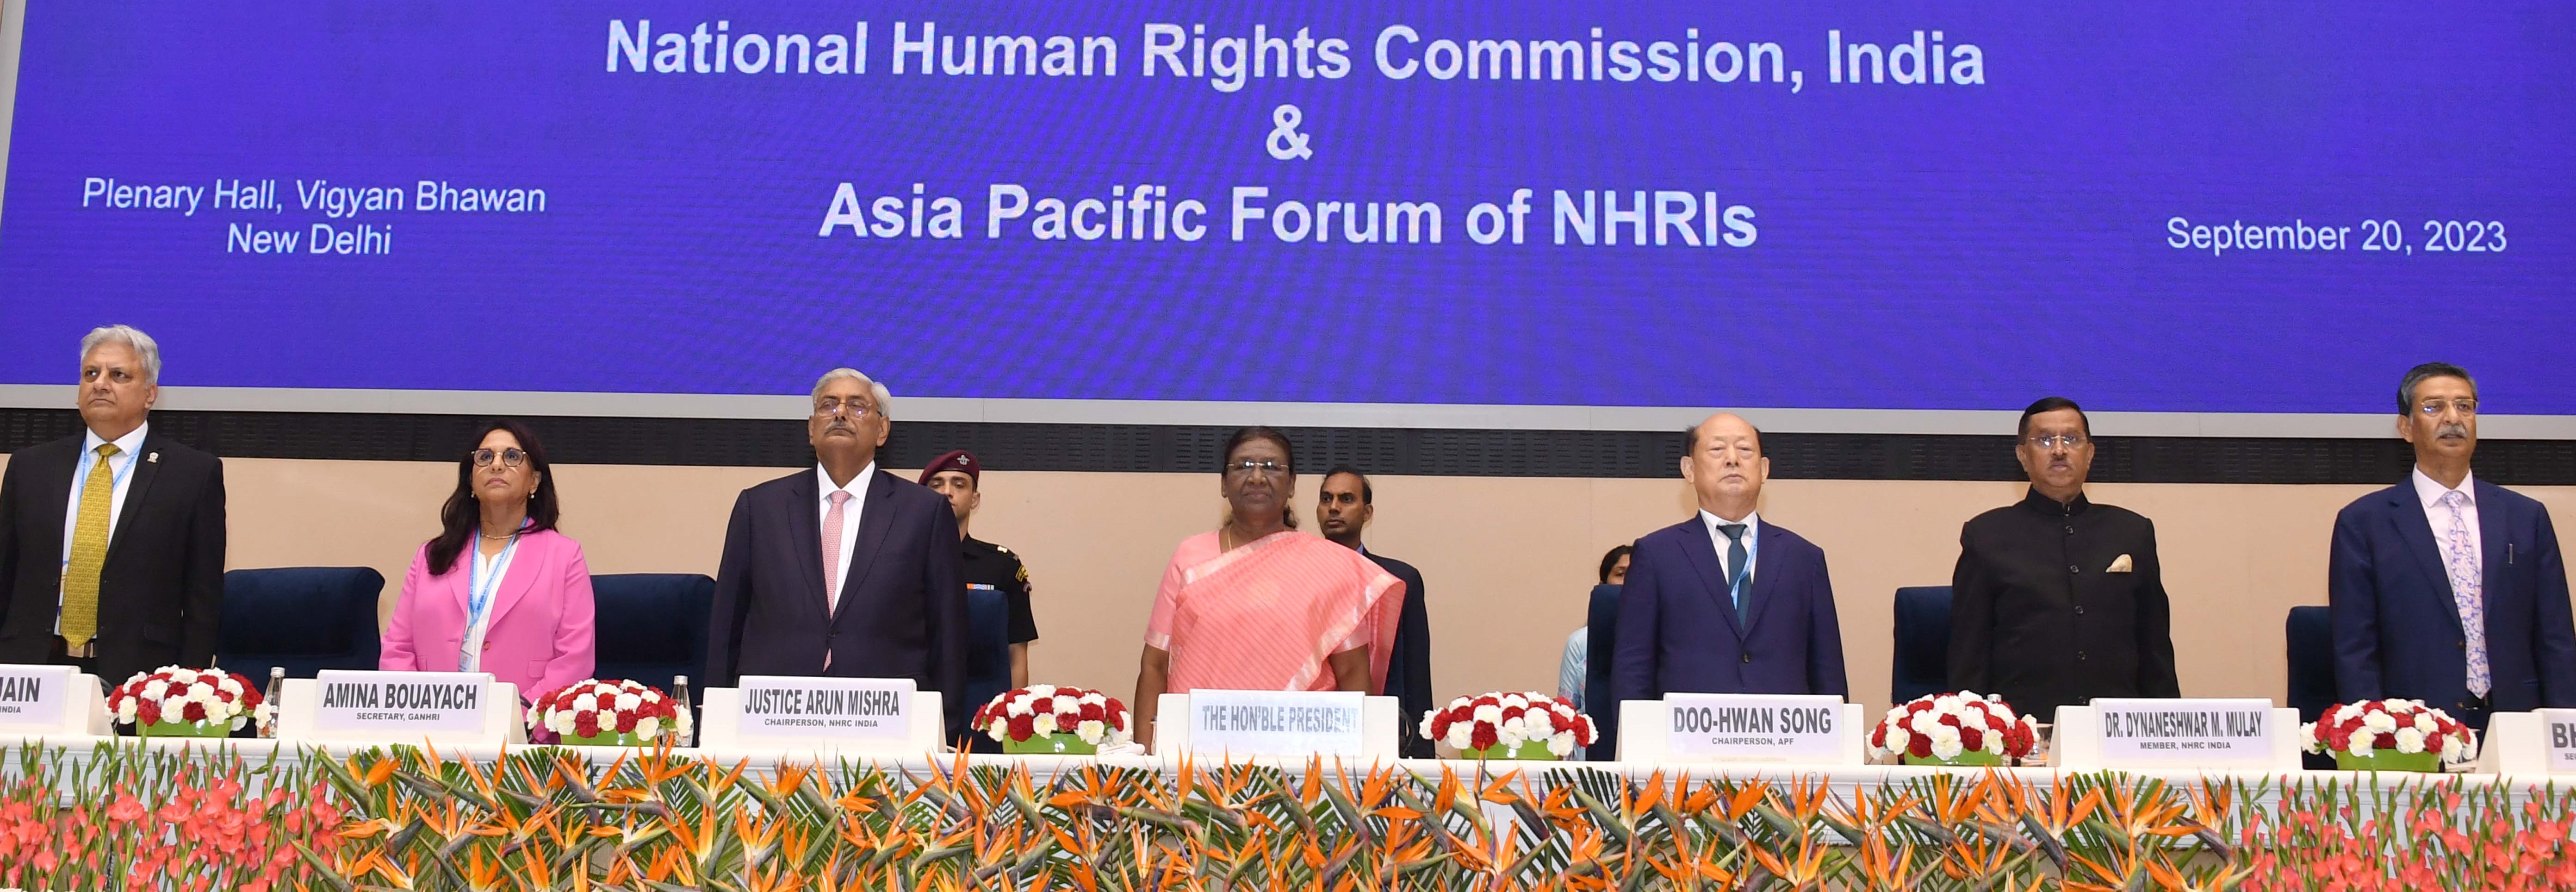 The President of India, Smt Droupadi Murmu inaugurated Annual General Meeting and Biennial Conference of the Asia Pacific Forum on Human Rights in New Delhi, on September 20, 2023.